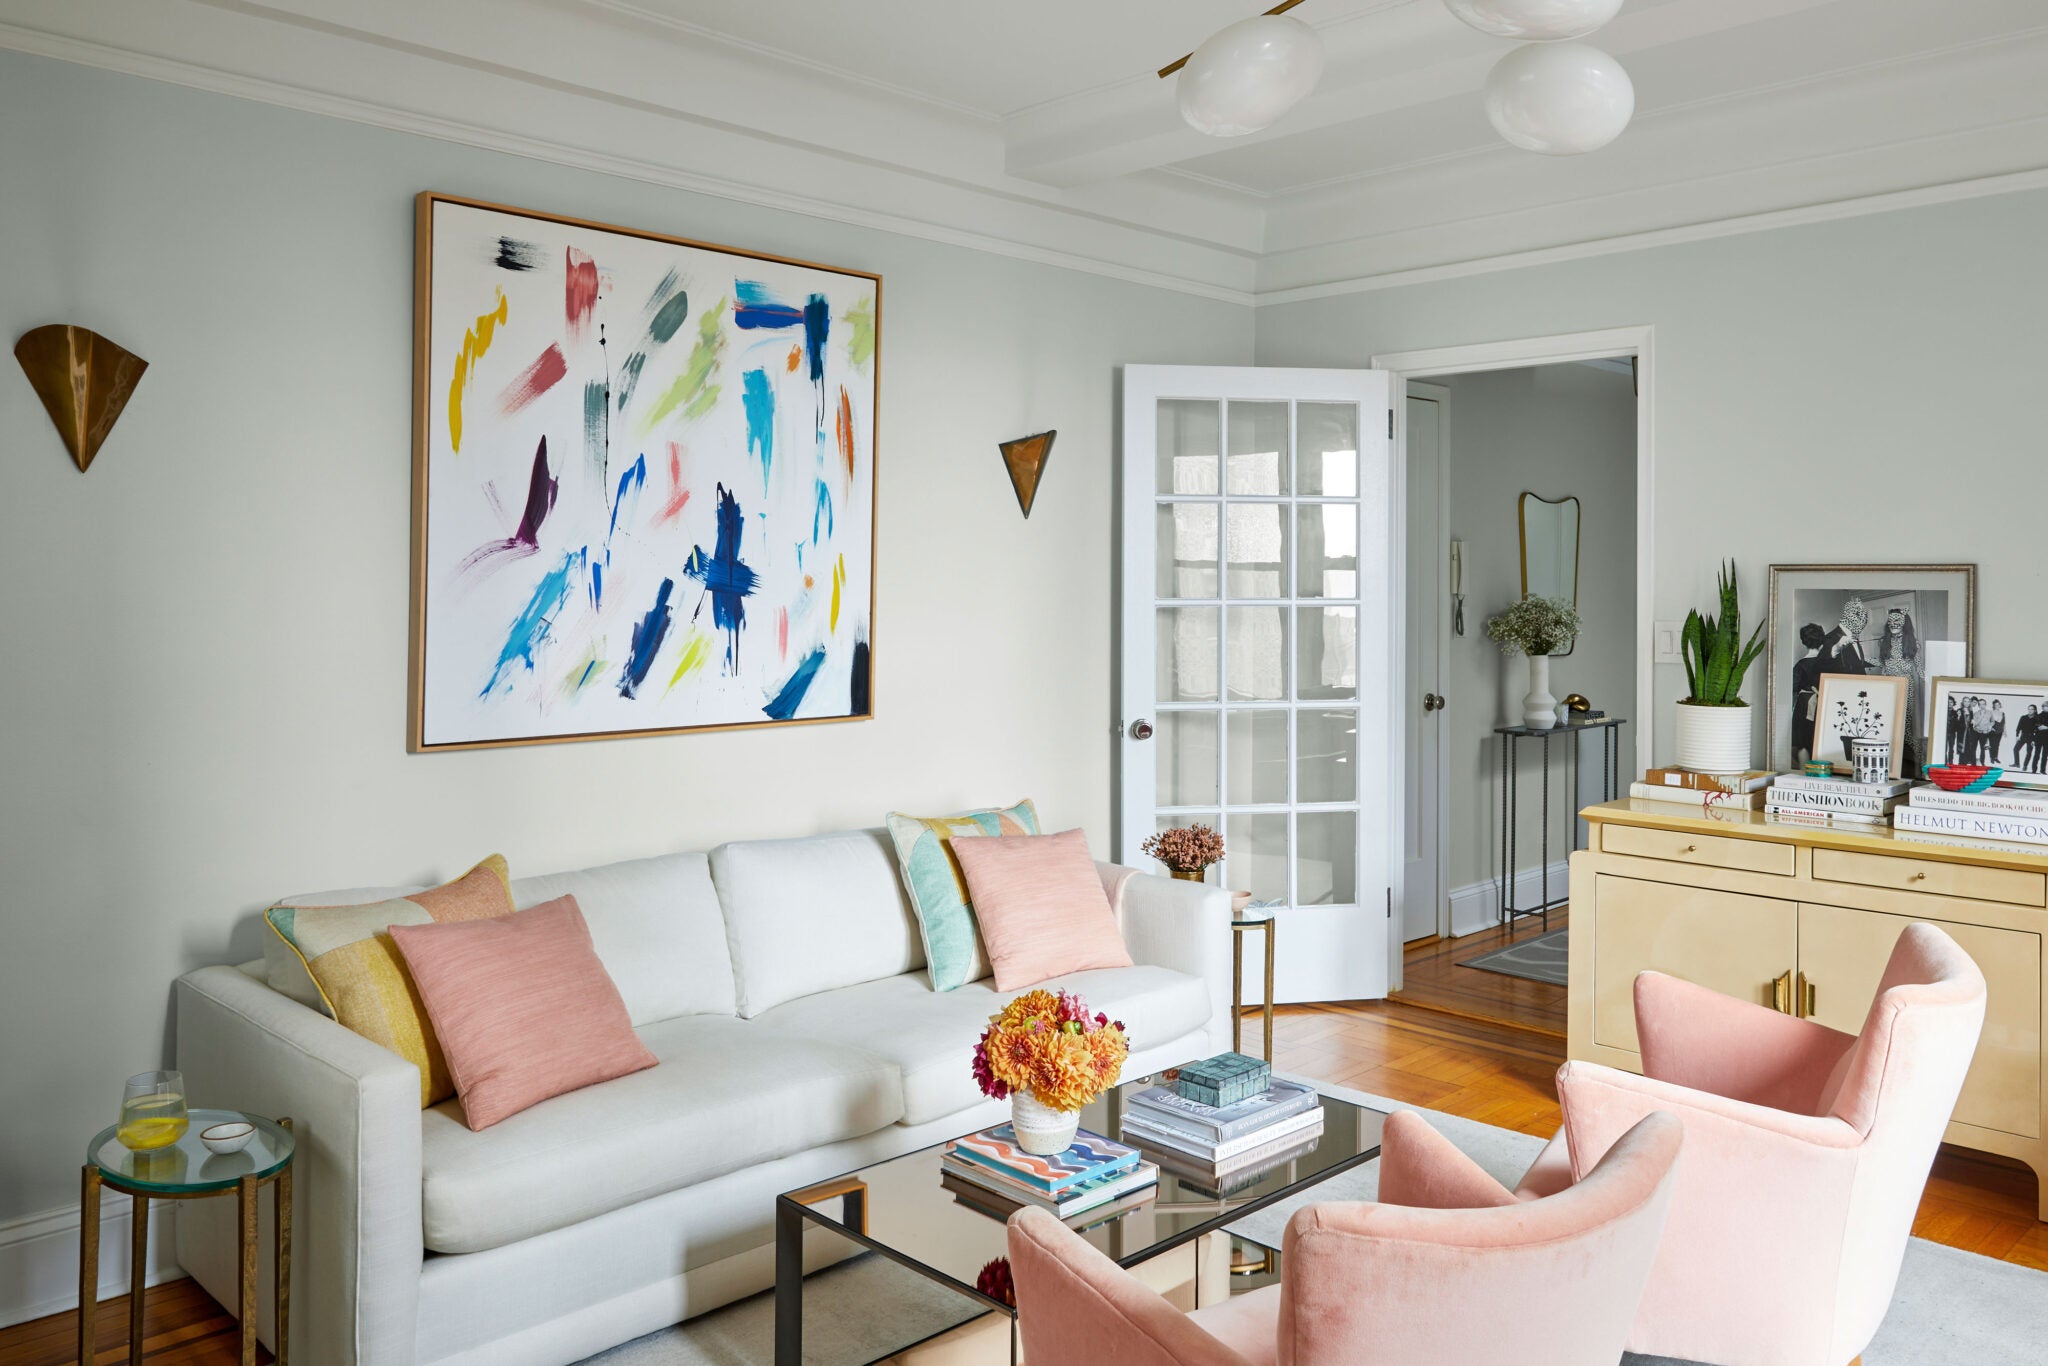 The Best Living Room Paint Colors Aren't Just Shades of White | domino